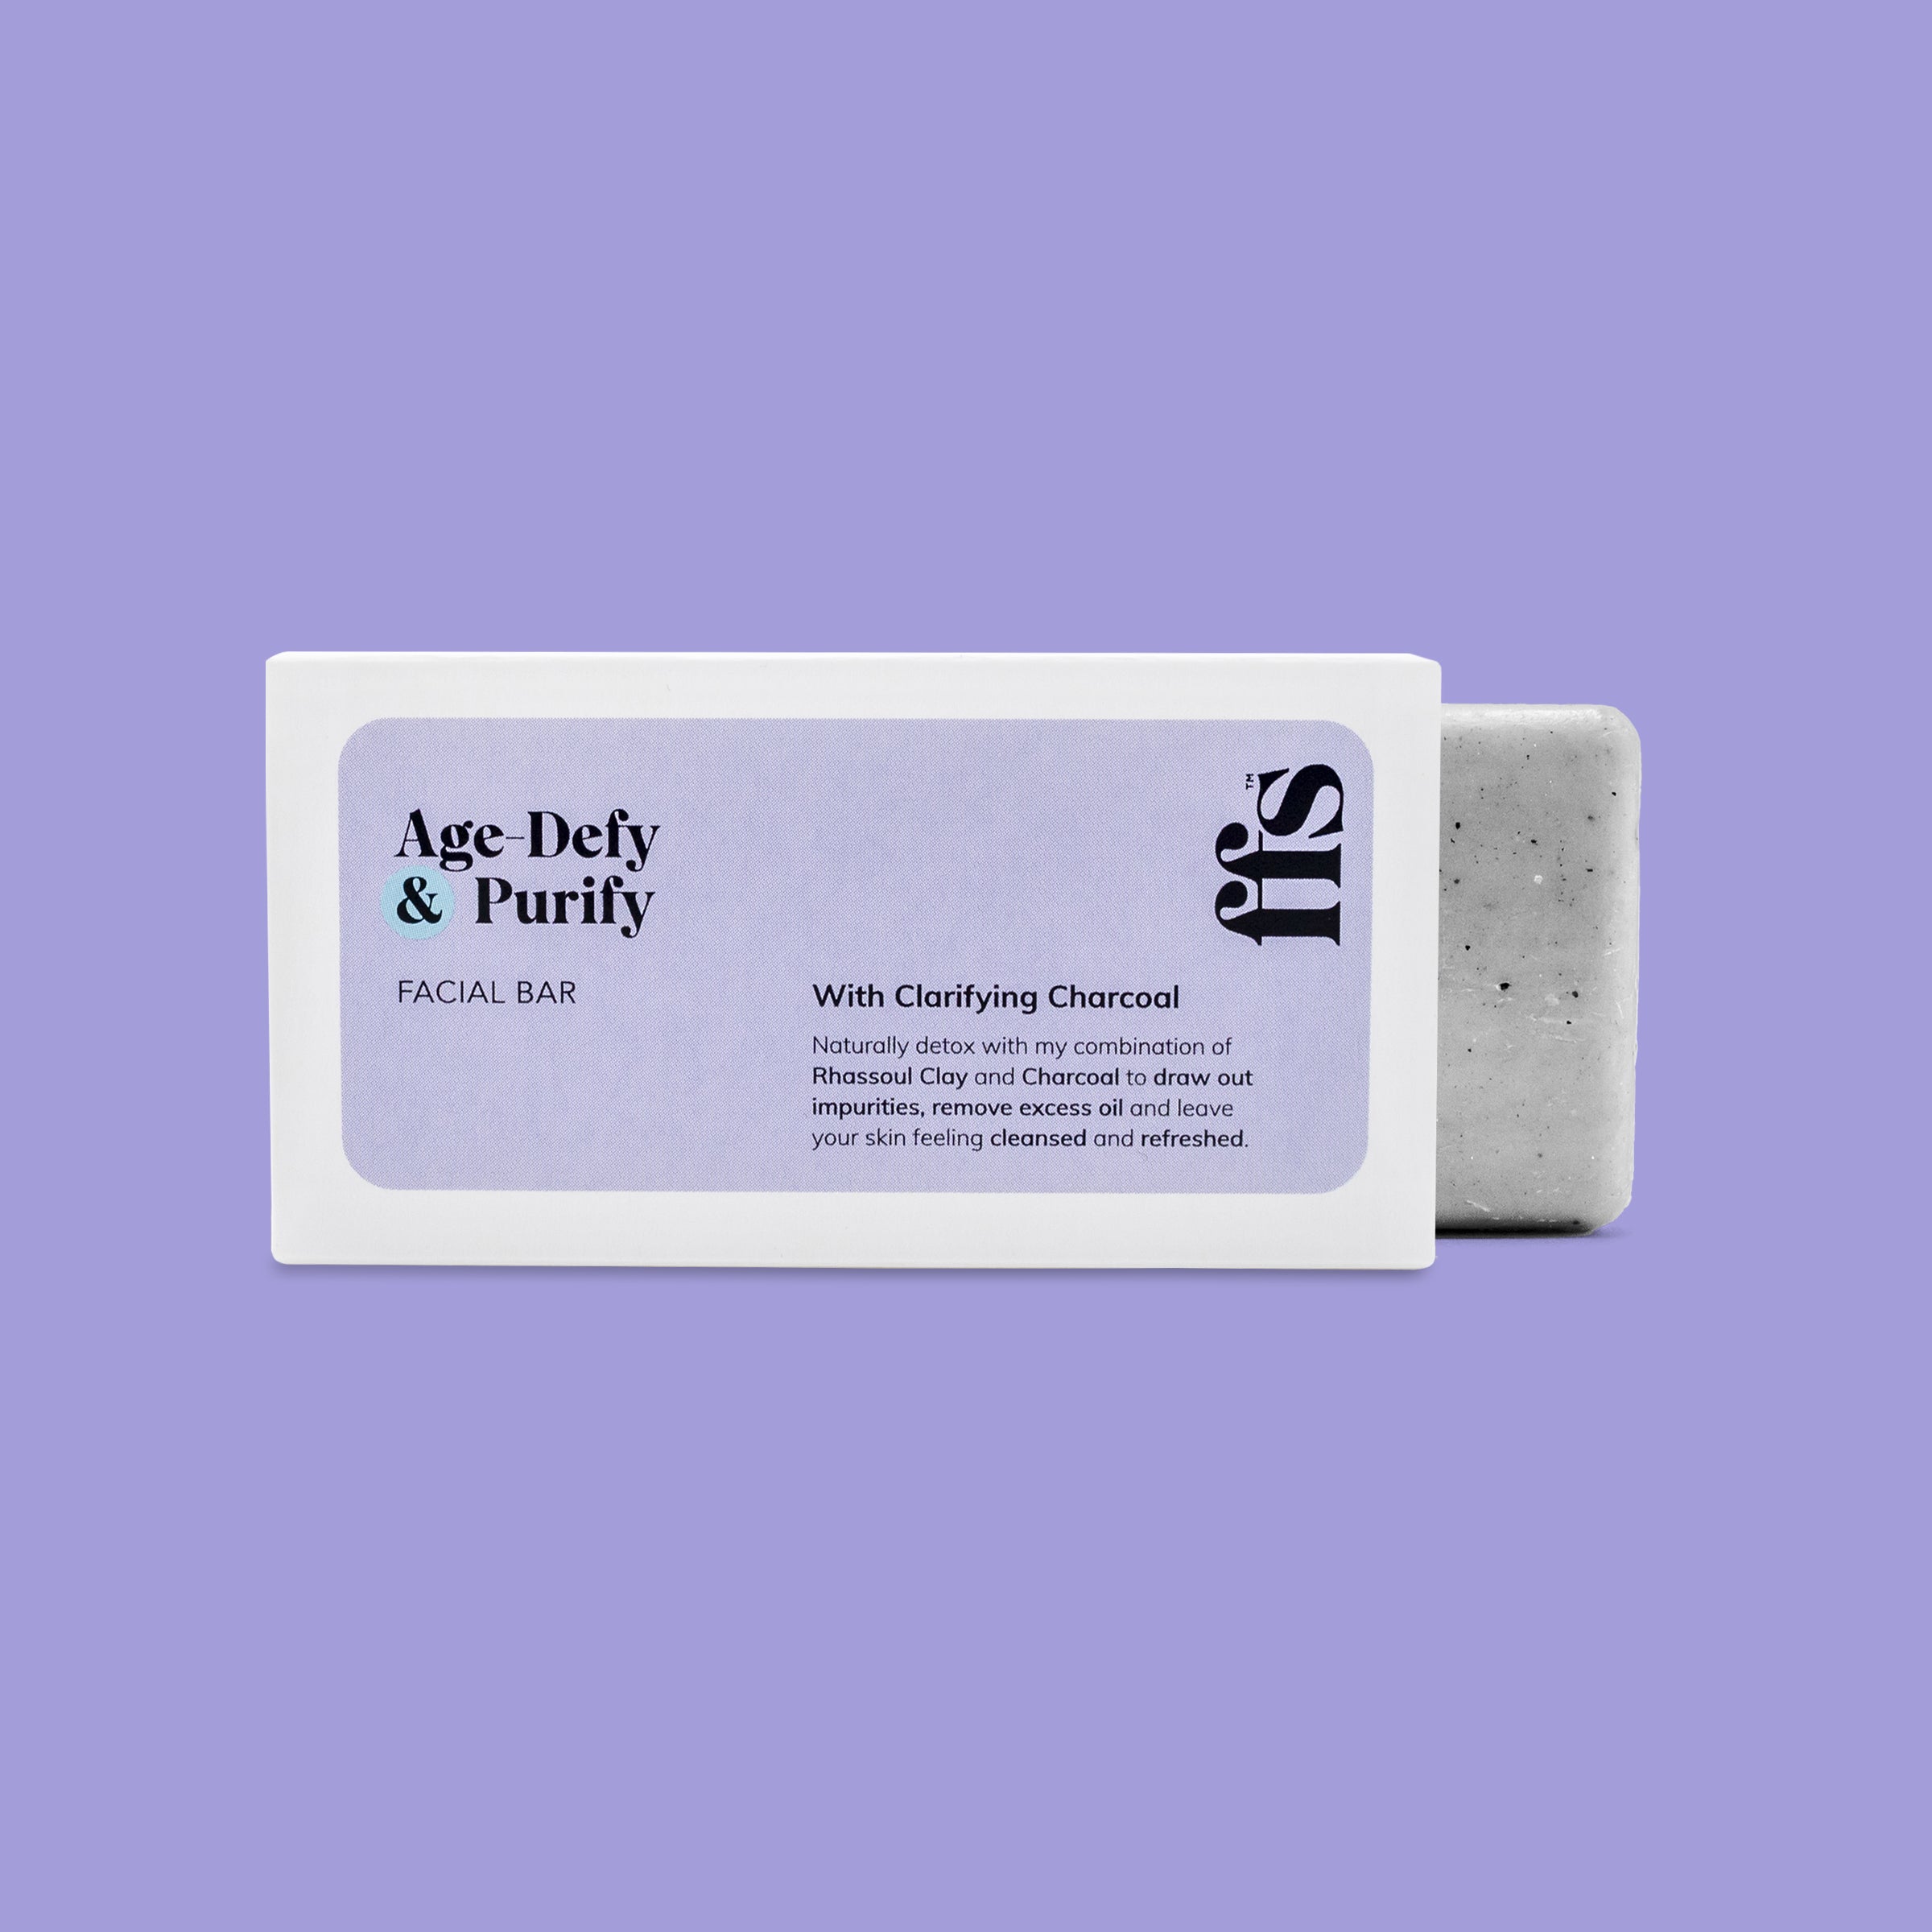 Age-Defy & Purify: Facial Bar with Clarifying Charcoal